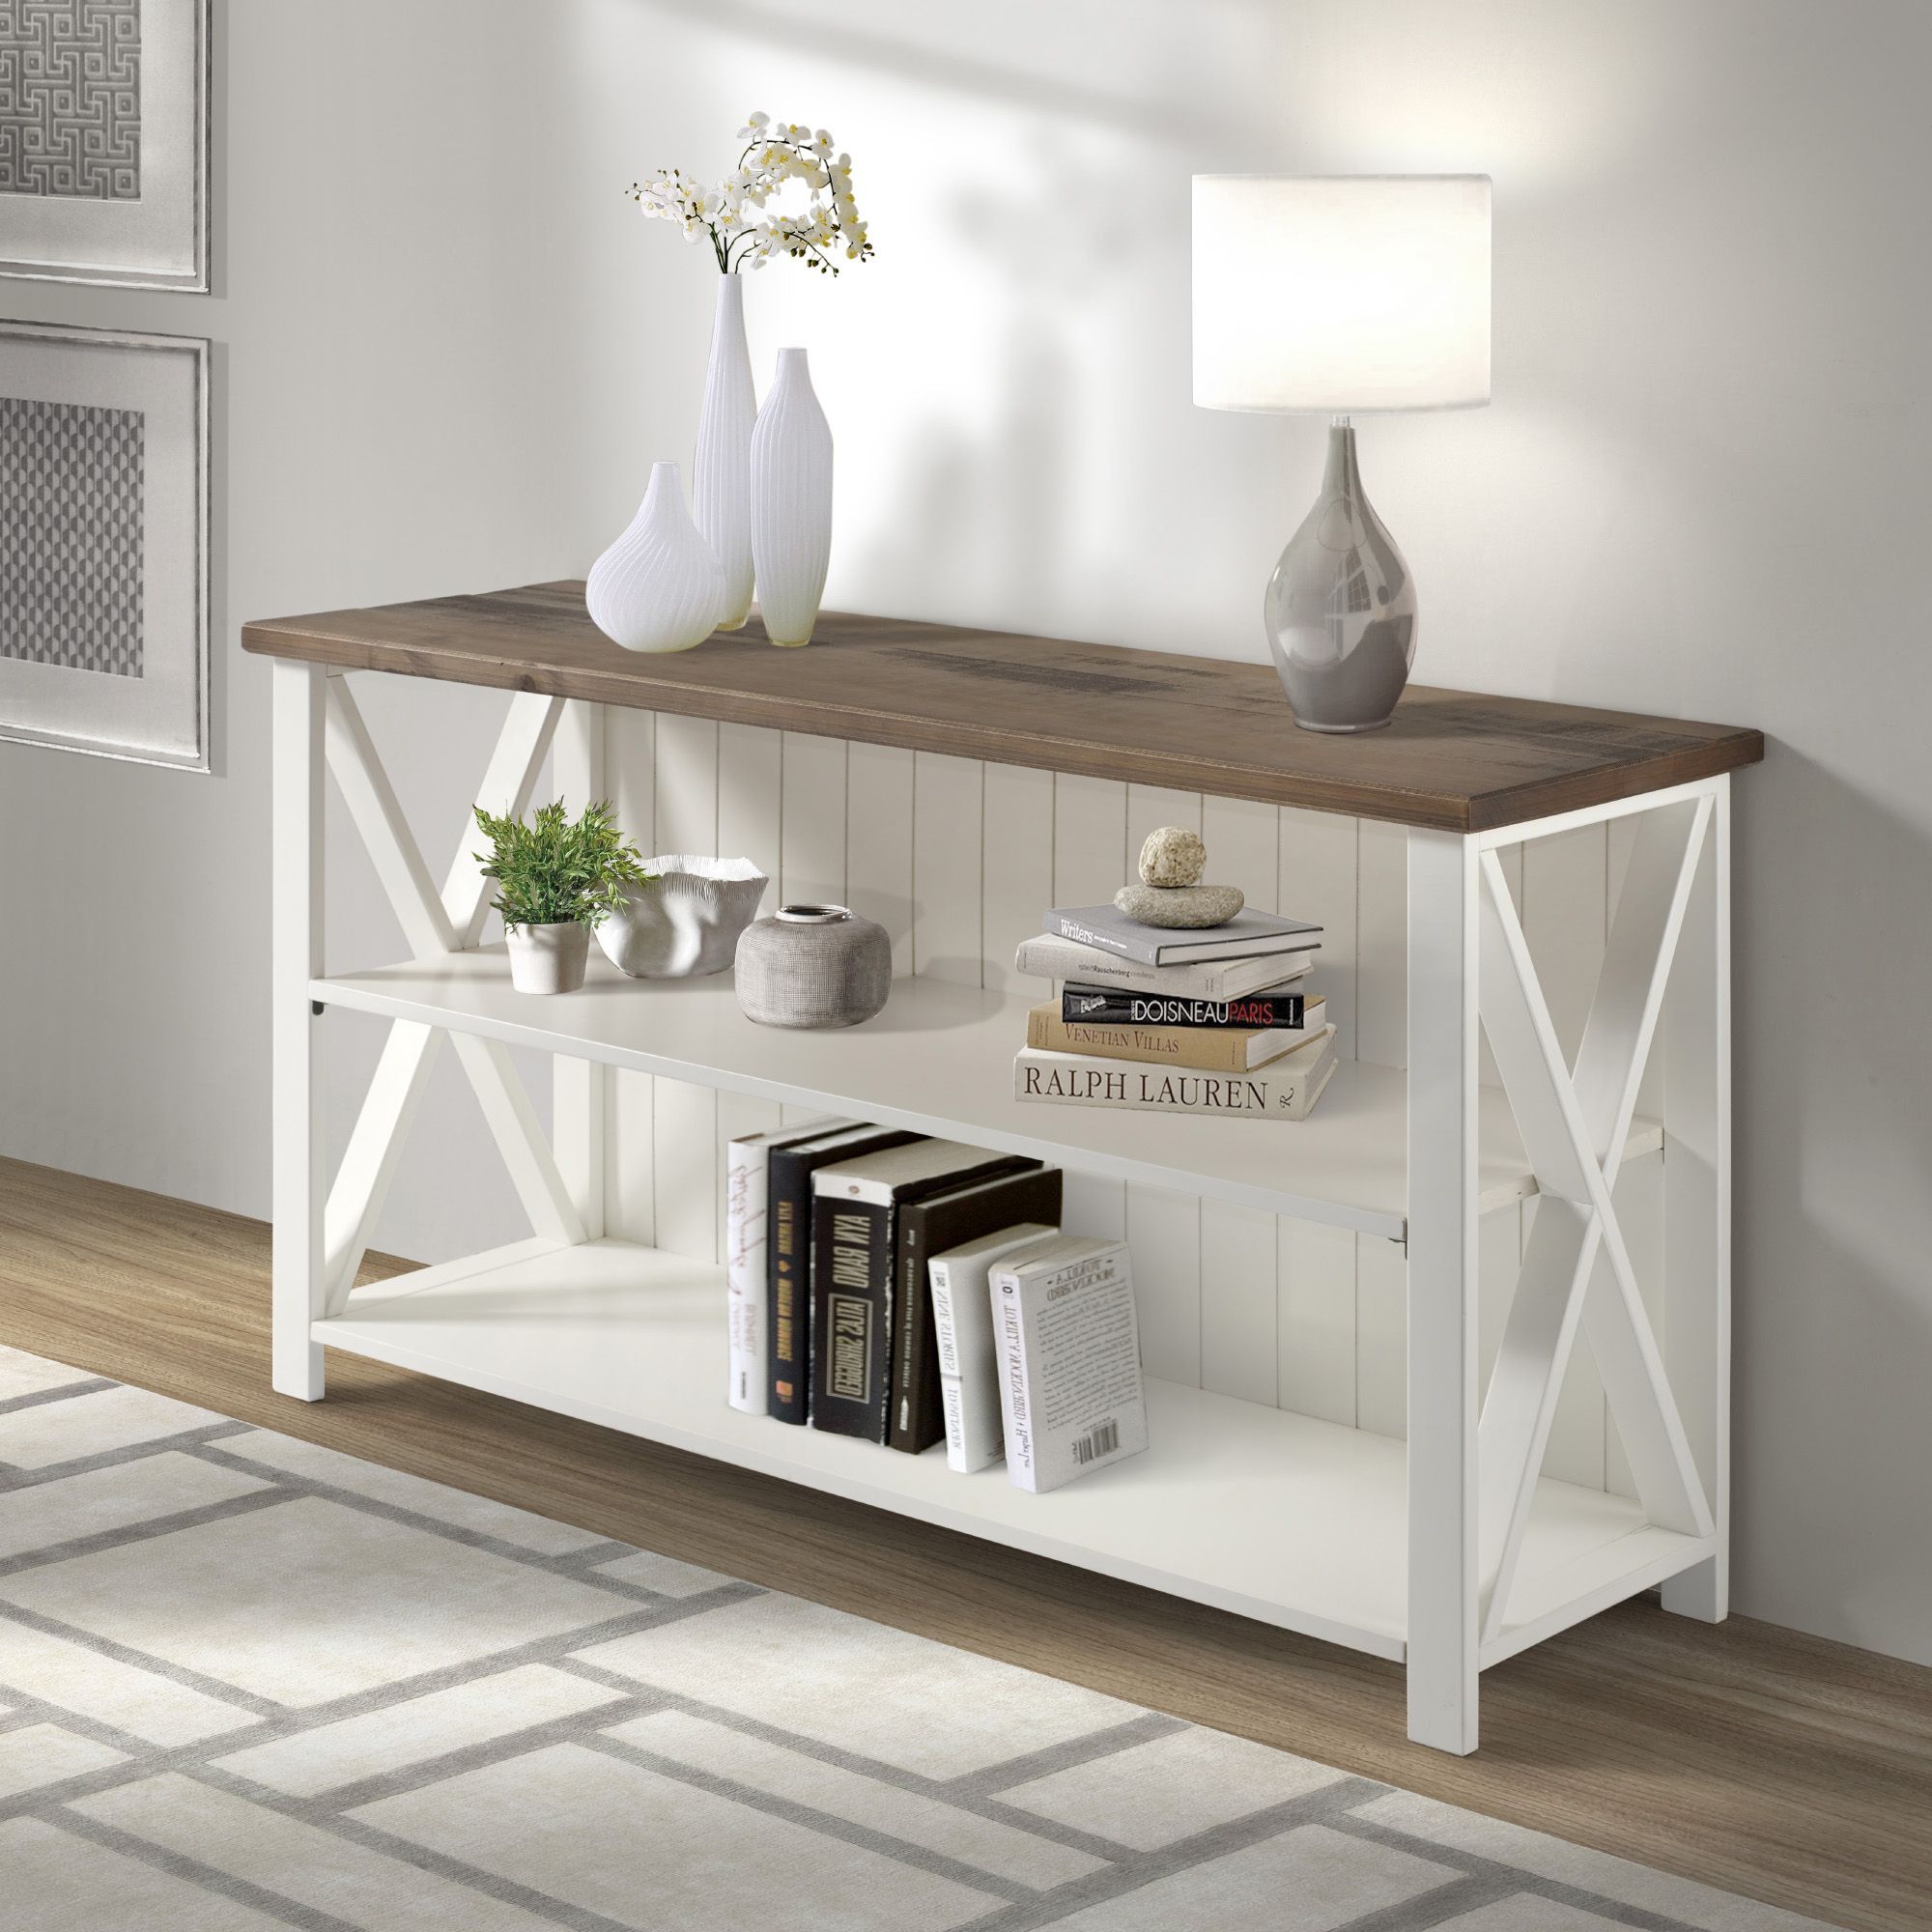 Woven Paths Solid Wood Storage Console Table, White With Regard To Woven Paths Open Storage Tv Stands With Multiple Finishes (View 7 of 15)